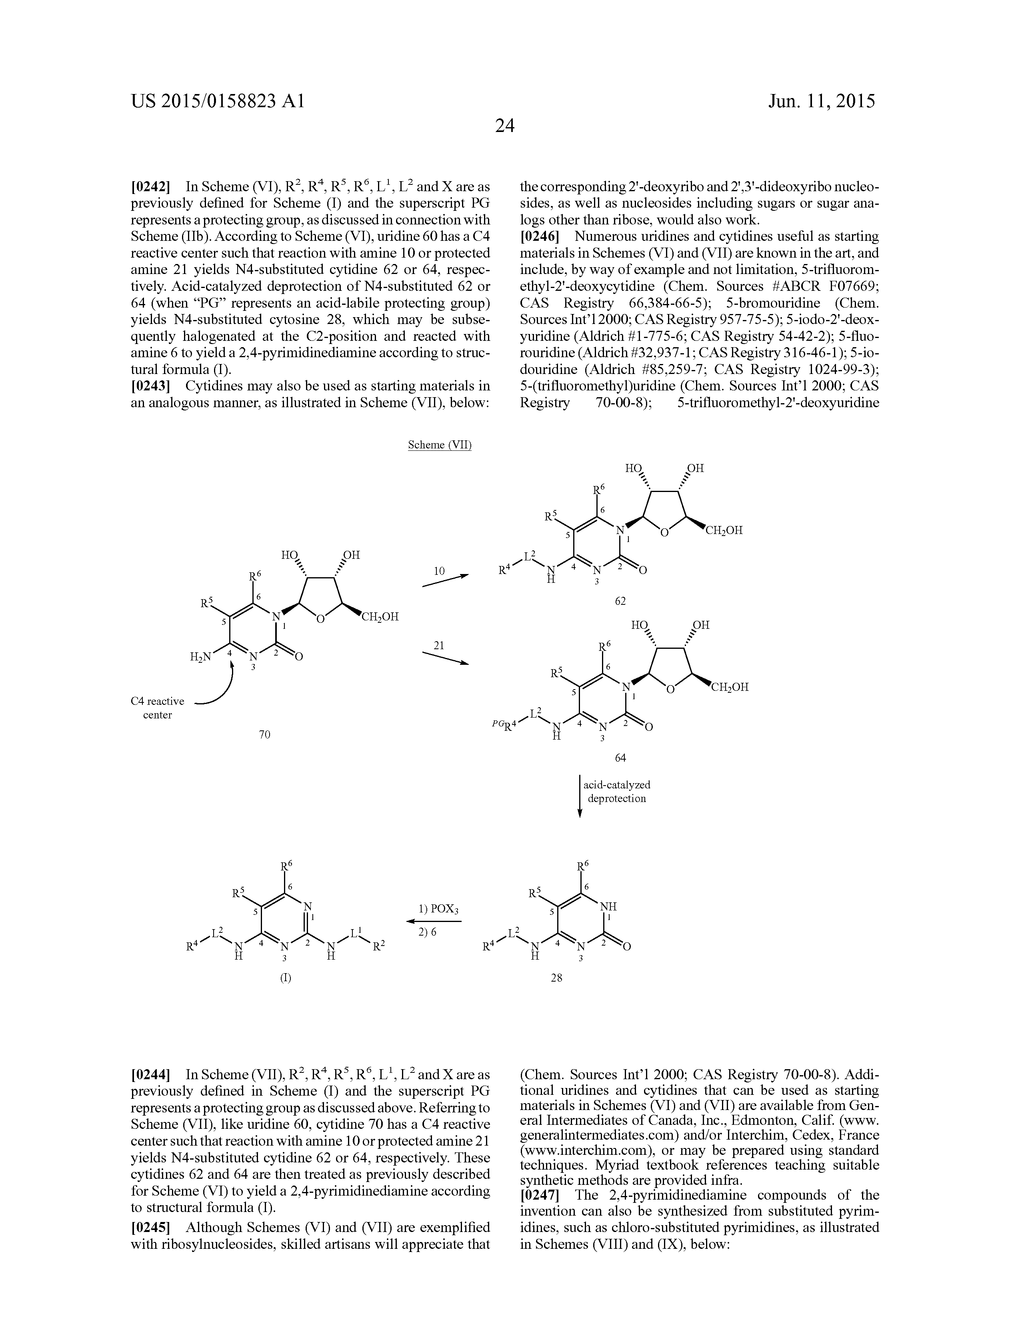 2,4-PYRIMIDINEDIAMINE COMPOUNDS AND THEIR USES - diagram, schematic, and image 39